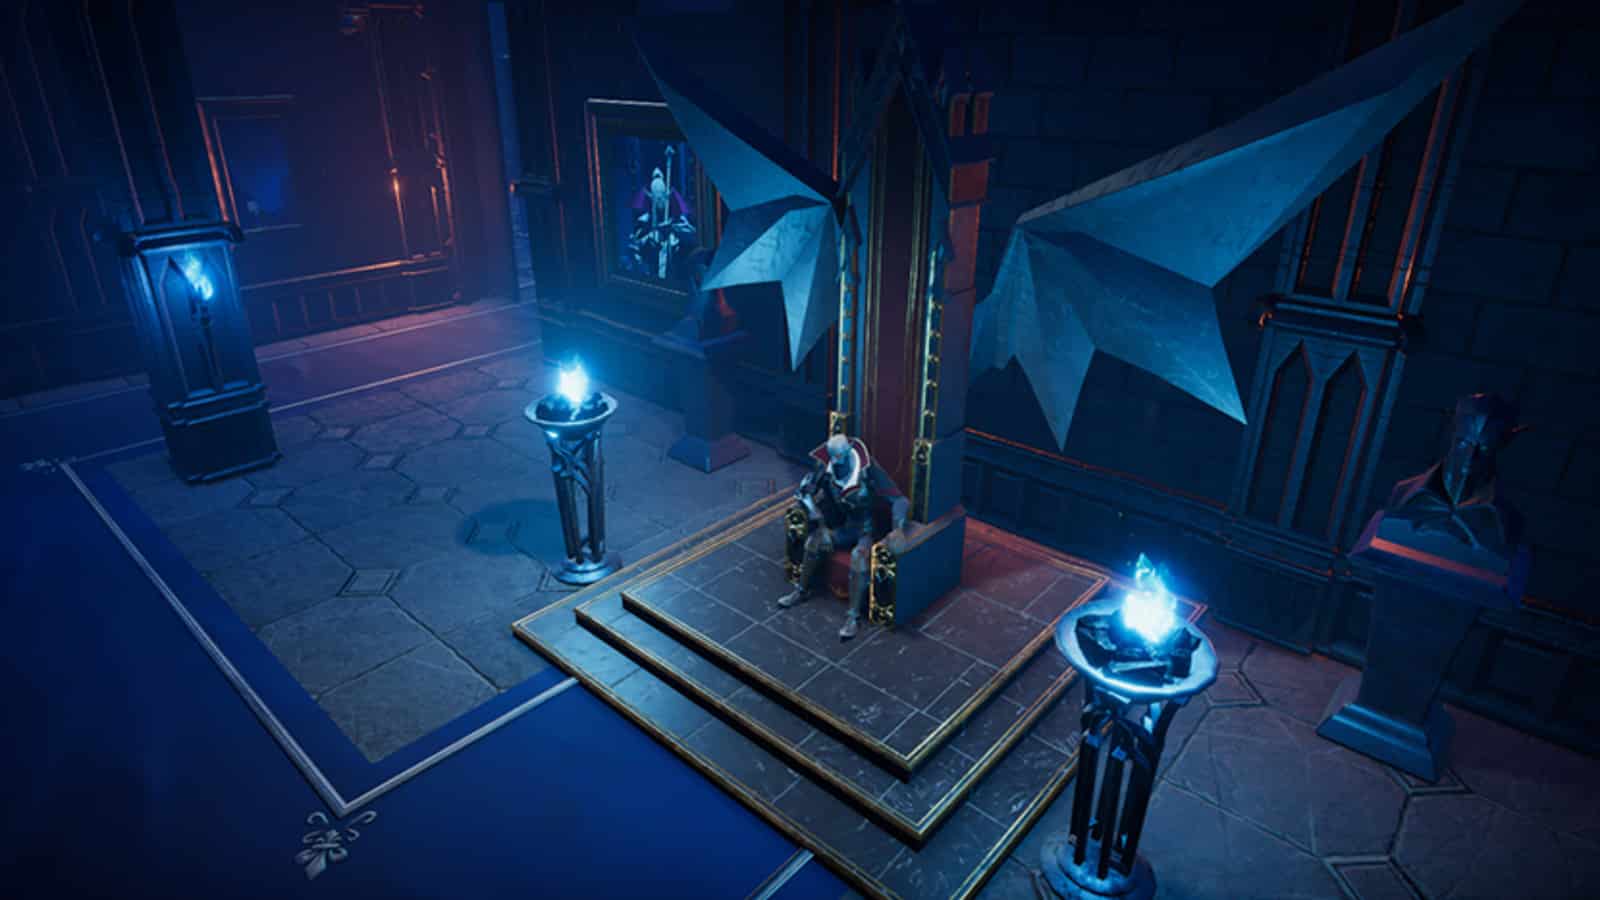 v rising male vampire sits on throne with bat wings in castle